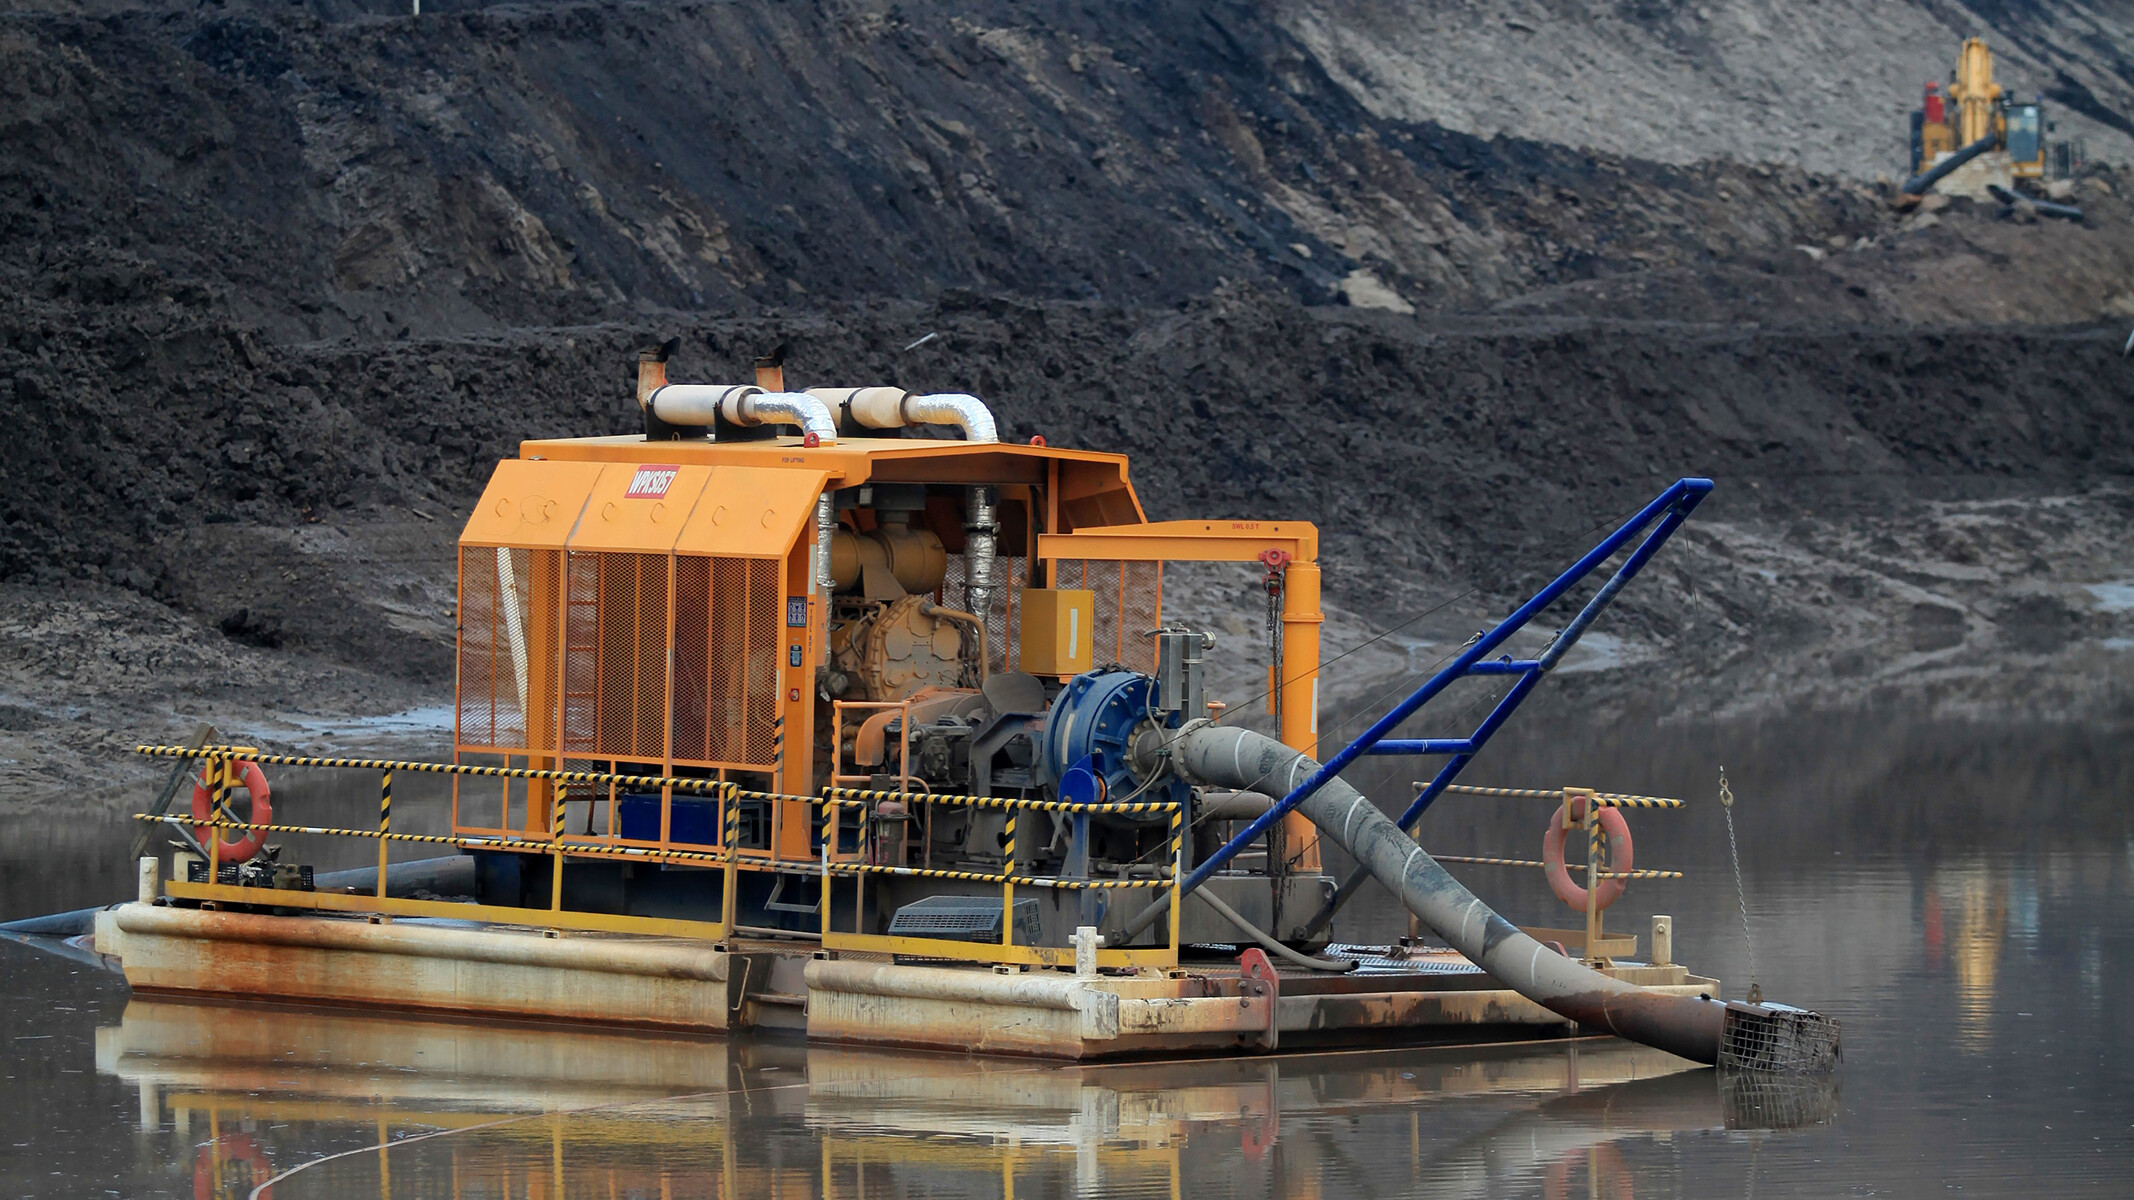 KSB dewatering and process pumps offer utmost efficiency in mining.